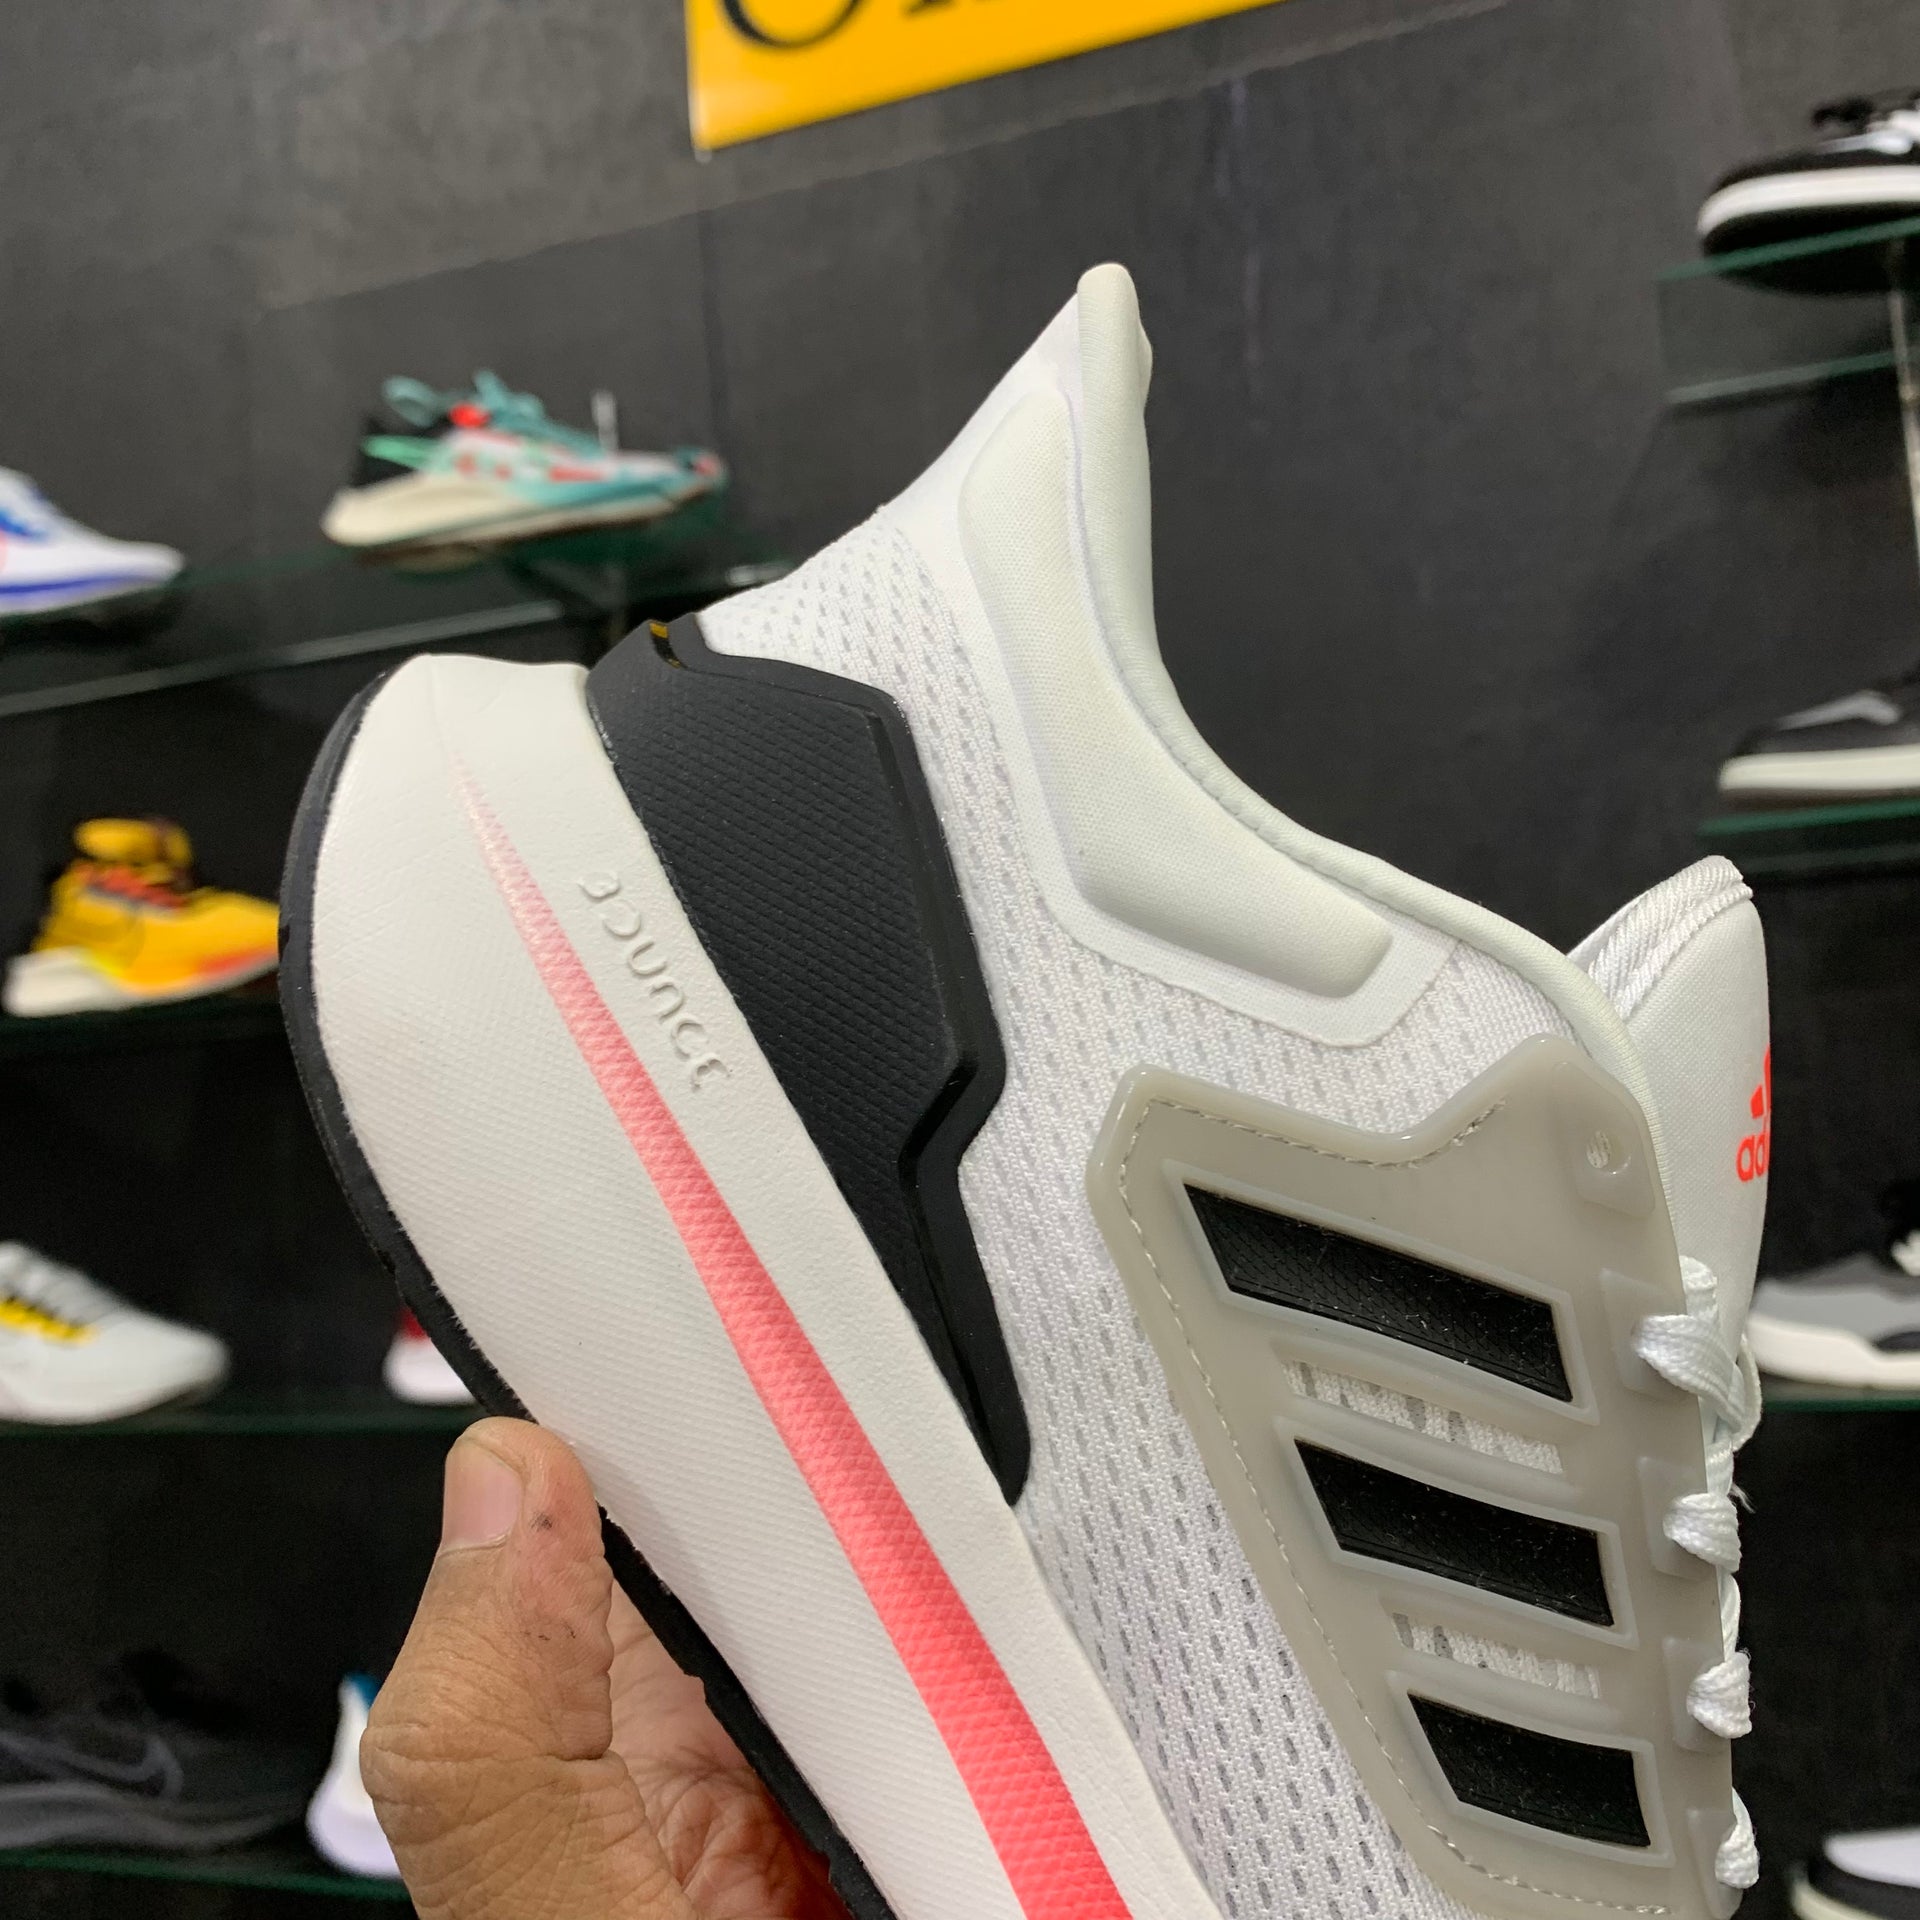 AD Ultra Bouncce Running White Red